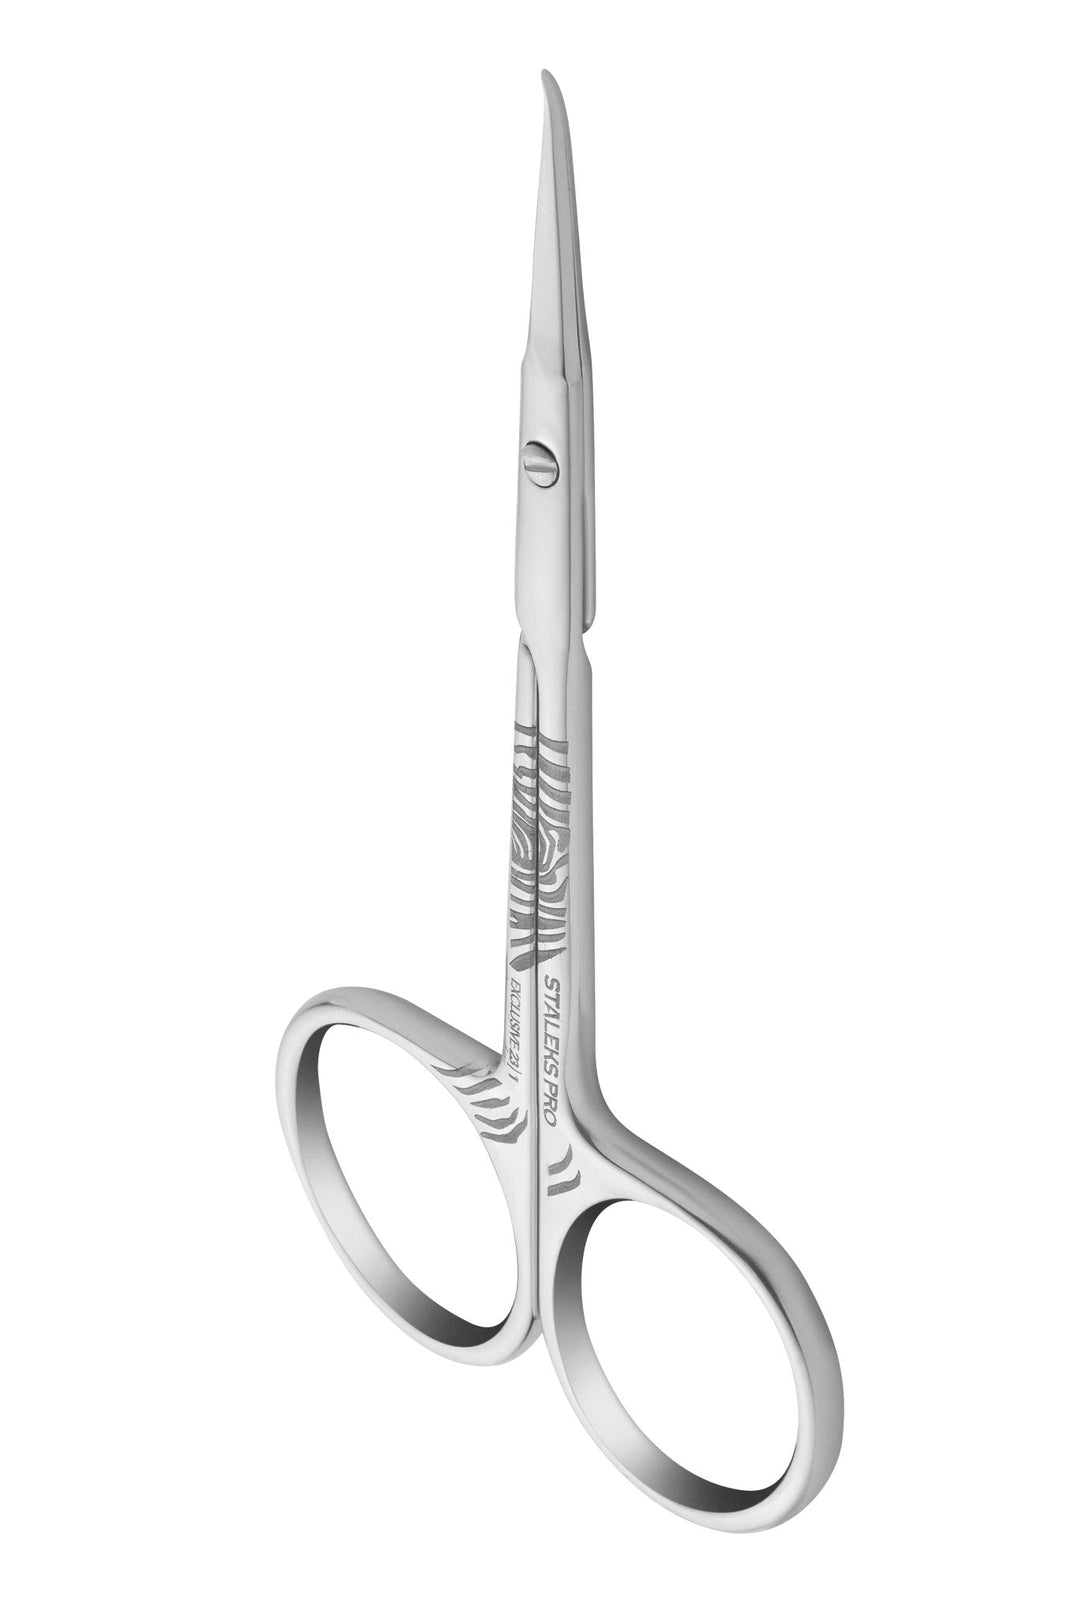 Staleks Pro Cuticle Scissors with Curved Blades Exclusive 23 Type 2 — 21 mm blades | U-tools